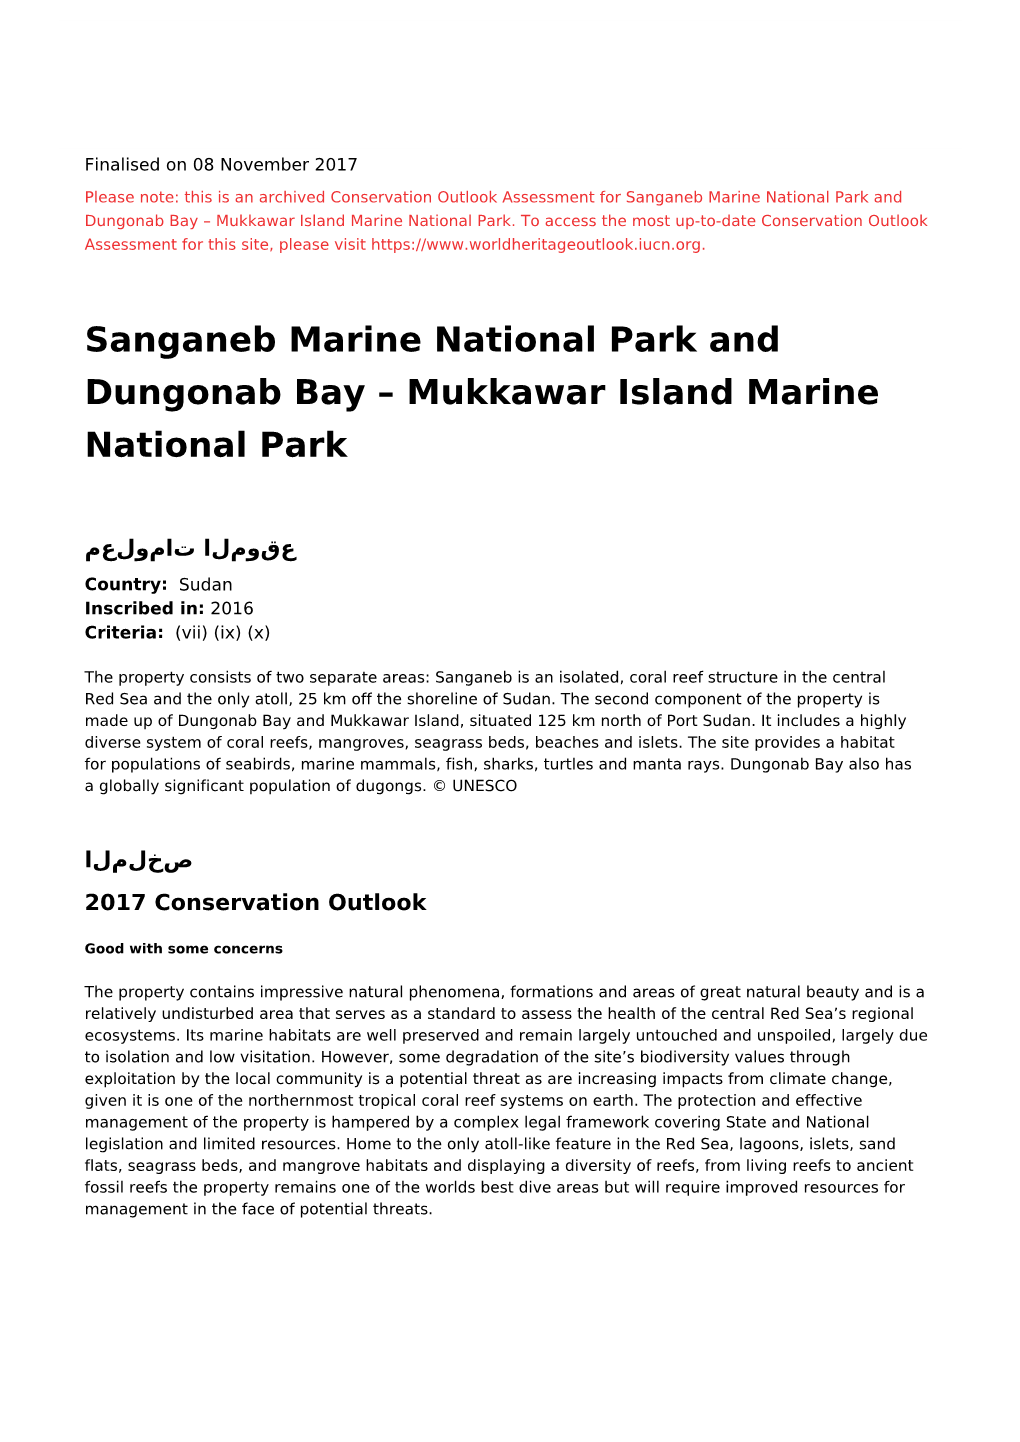 Sanganeb Marine National Park and Dungonab Bay – Mukkawar Island Marine National Park - 2017 Conservation Outlook Assessment (Archived)